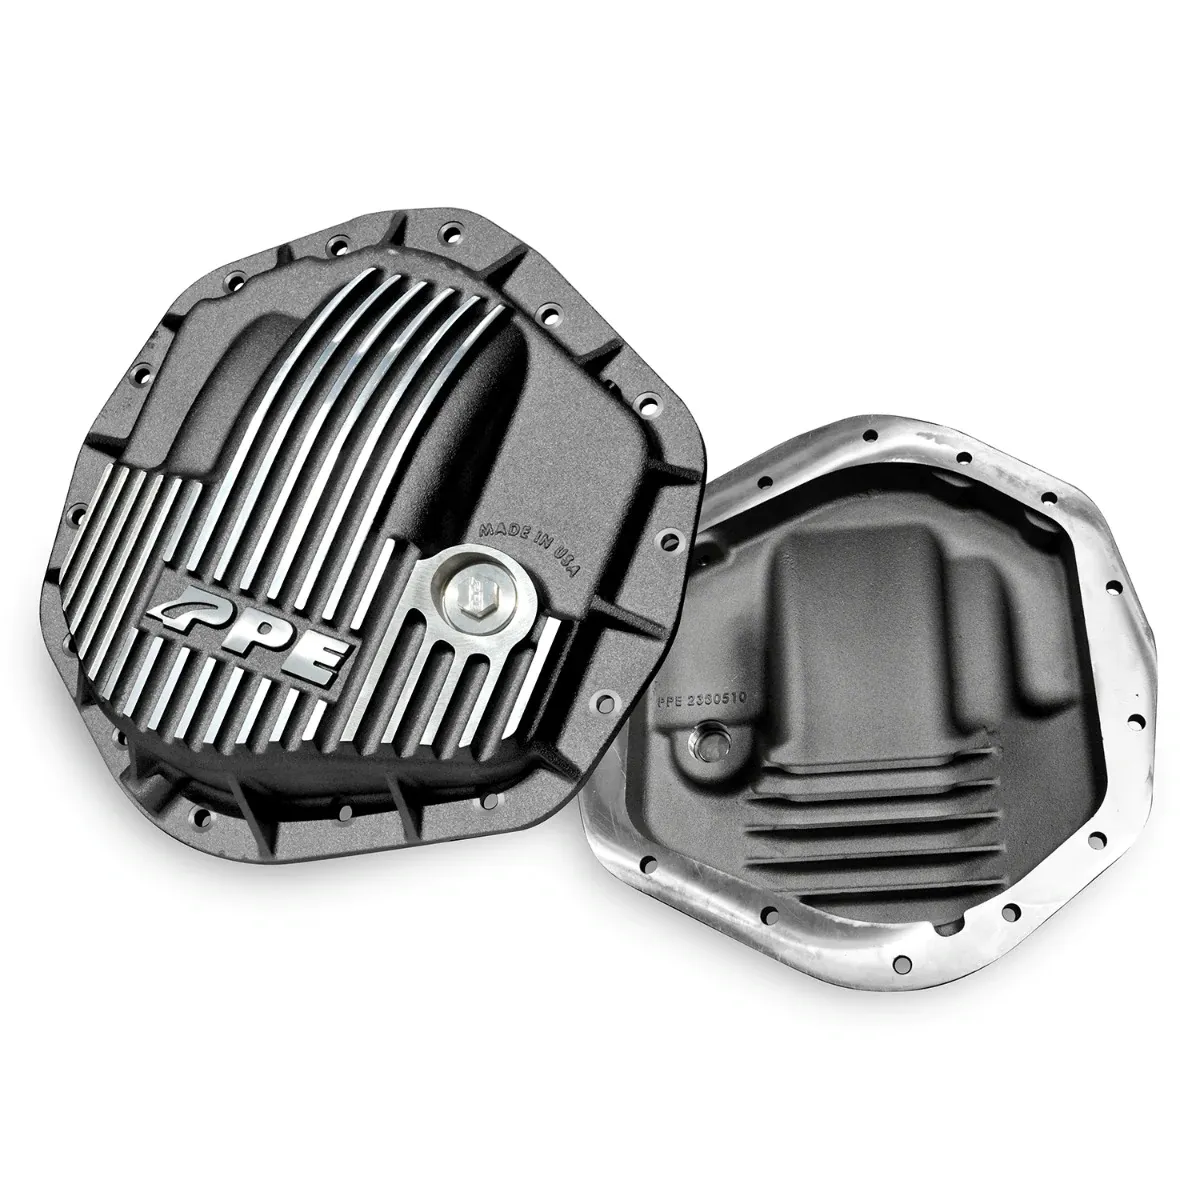 PPE - PPE Heavy Duty Brushed Aluminum Rear Differential Cover For 01-10 Ram 2500/3500